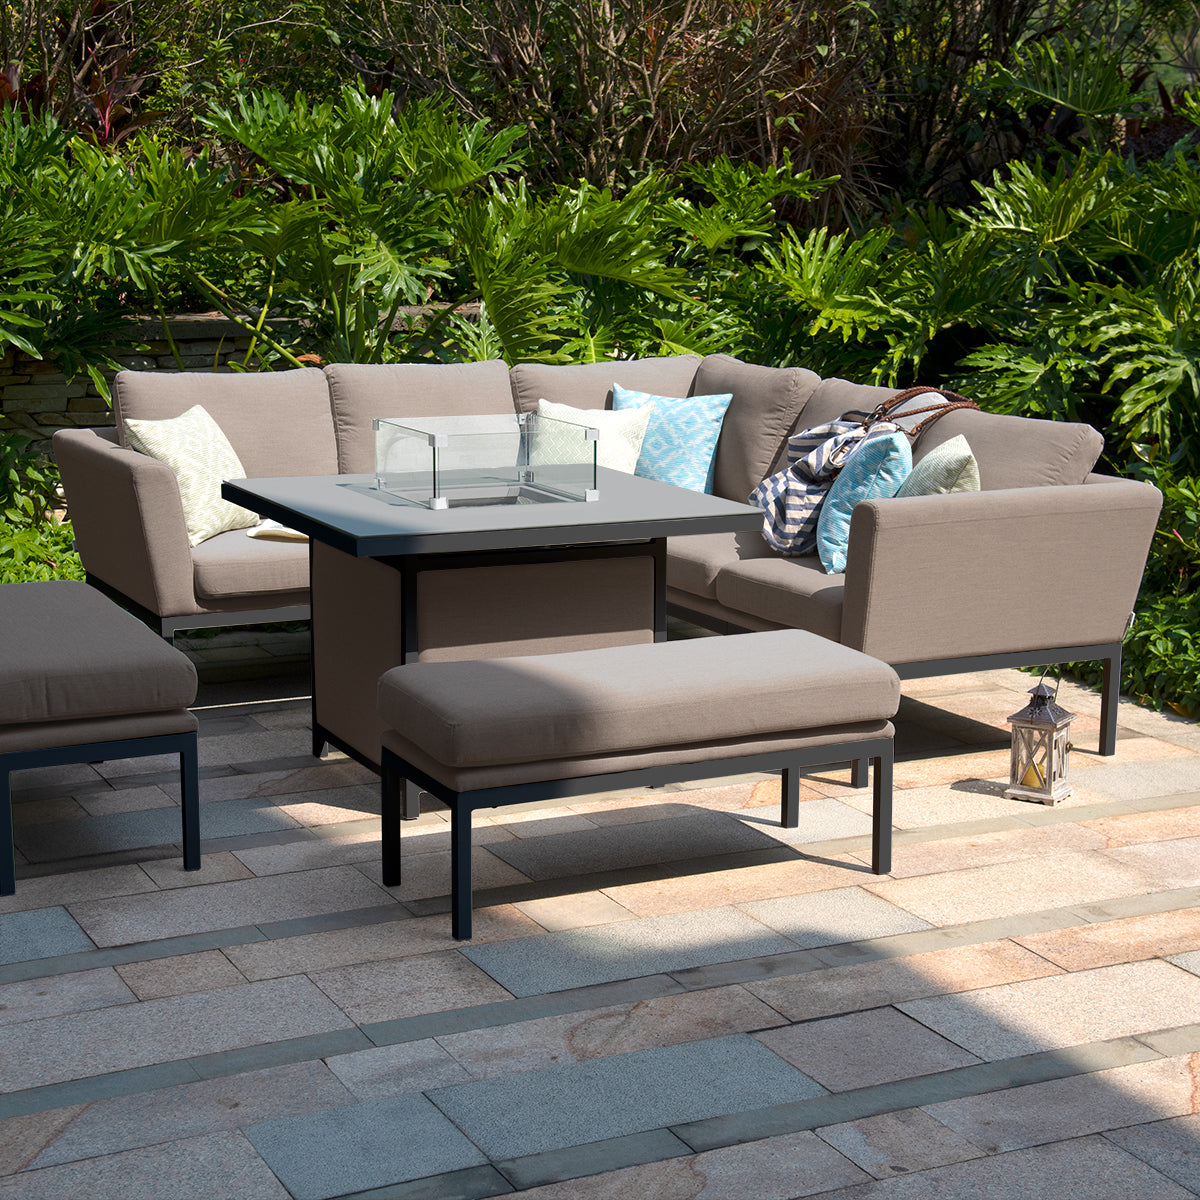 Maze - Outdoor Fabric Pulse Square Corner Dining Set with Fire Pit Table - Taupe